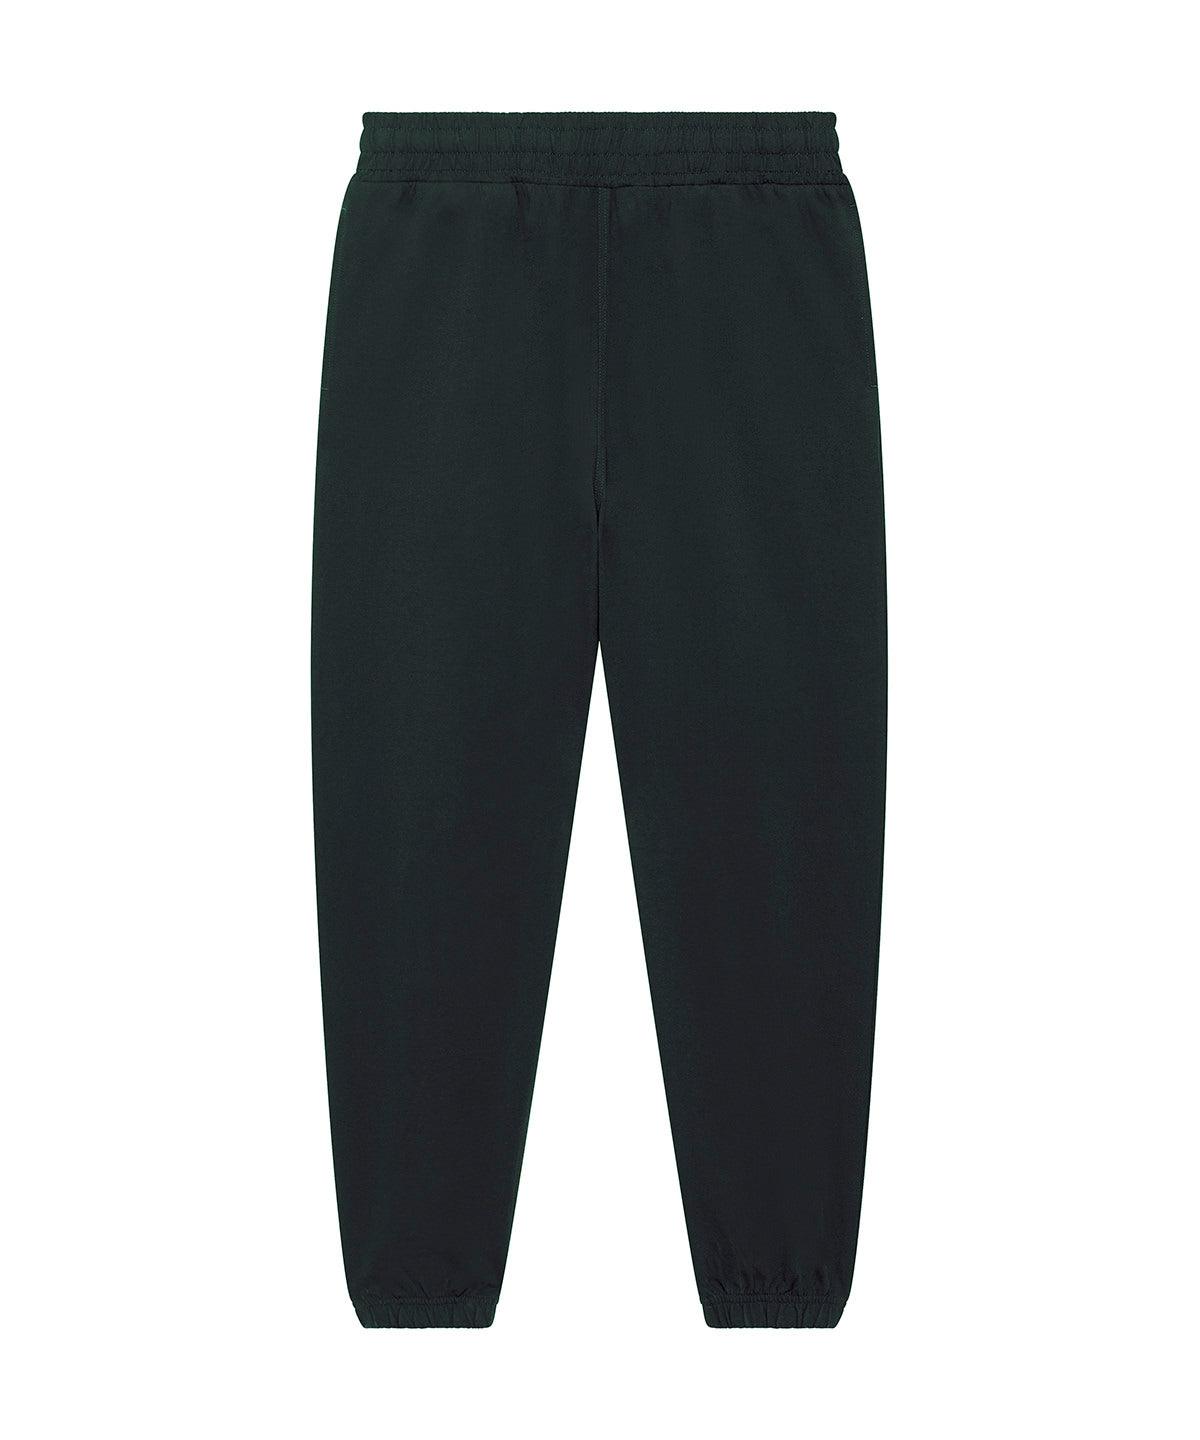 Black - Decker terry relaxed fit jogger pants (STBU587) Sweatpants Stanley/Stella Exclusives, Joggers, New Styles For 2022, Organic & Conscious, Stanley/ Stella Schoolwear Centres